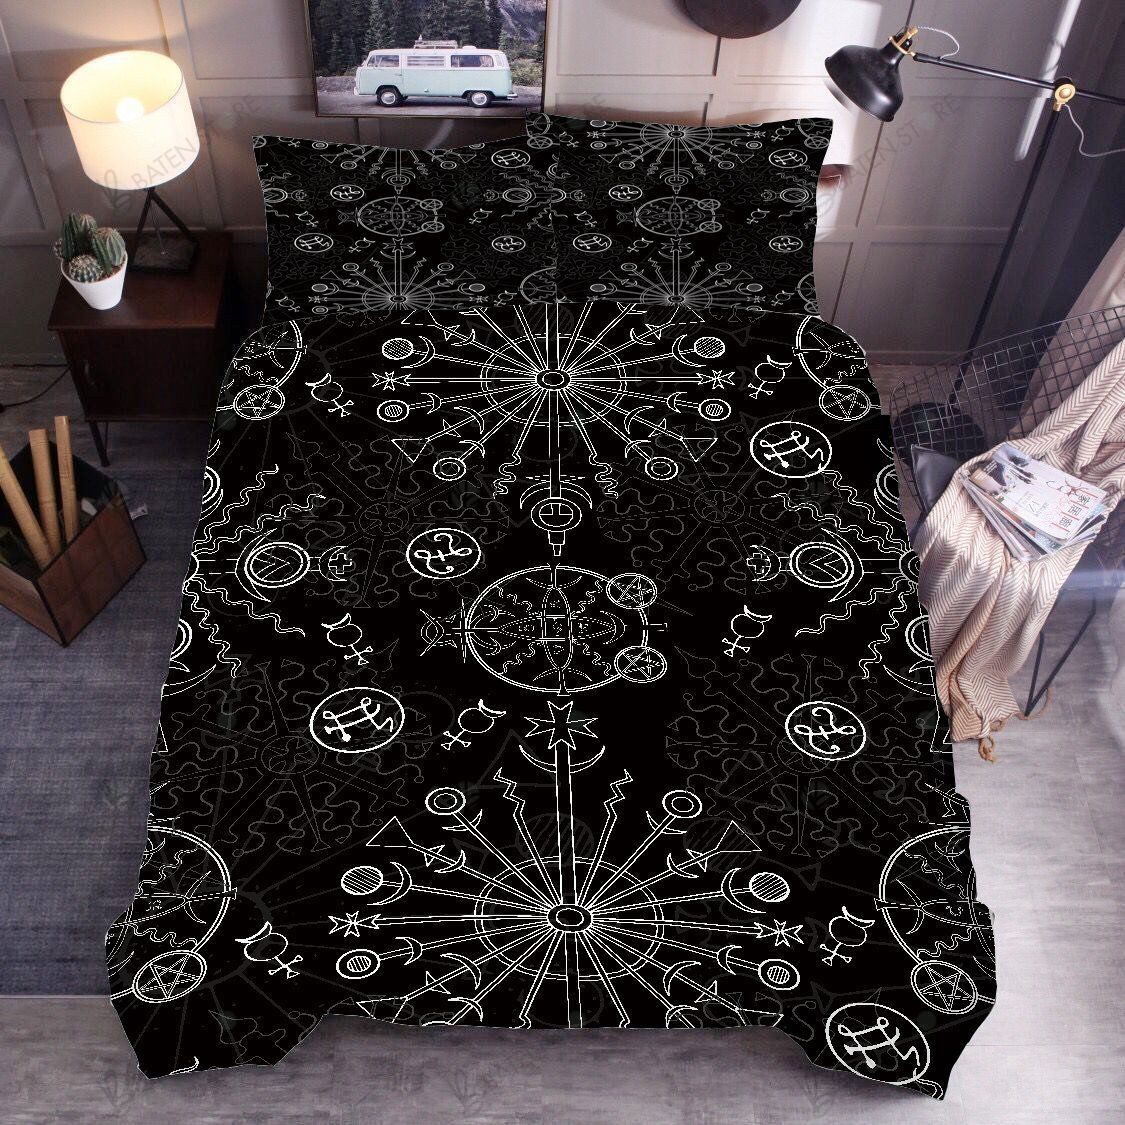 3d black tarot bed sheets duvet cover bedding set perfect presents for birthdays christmas and thanksgiving 9qz1t